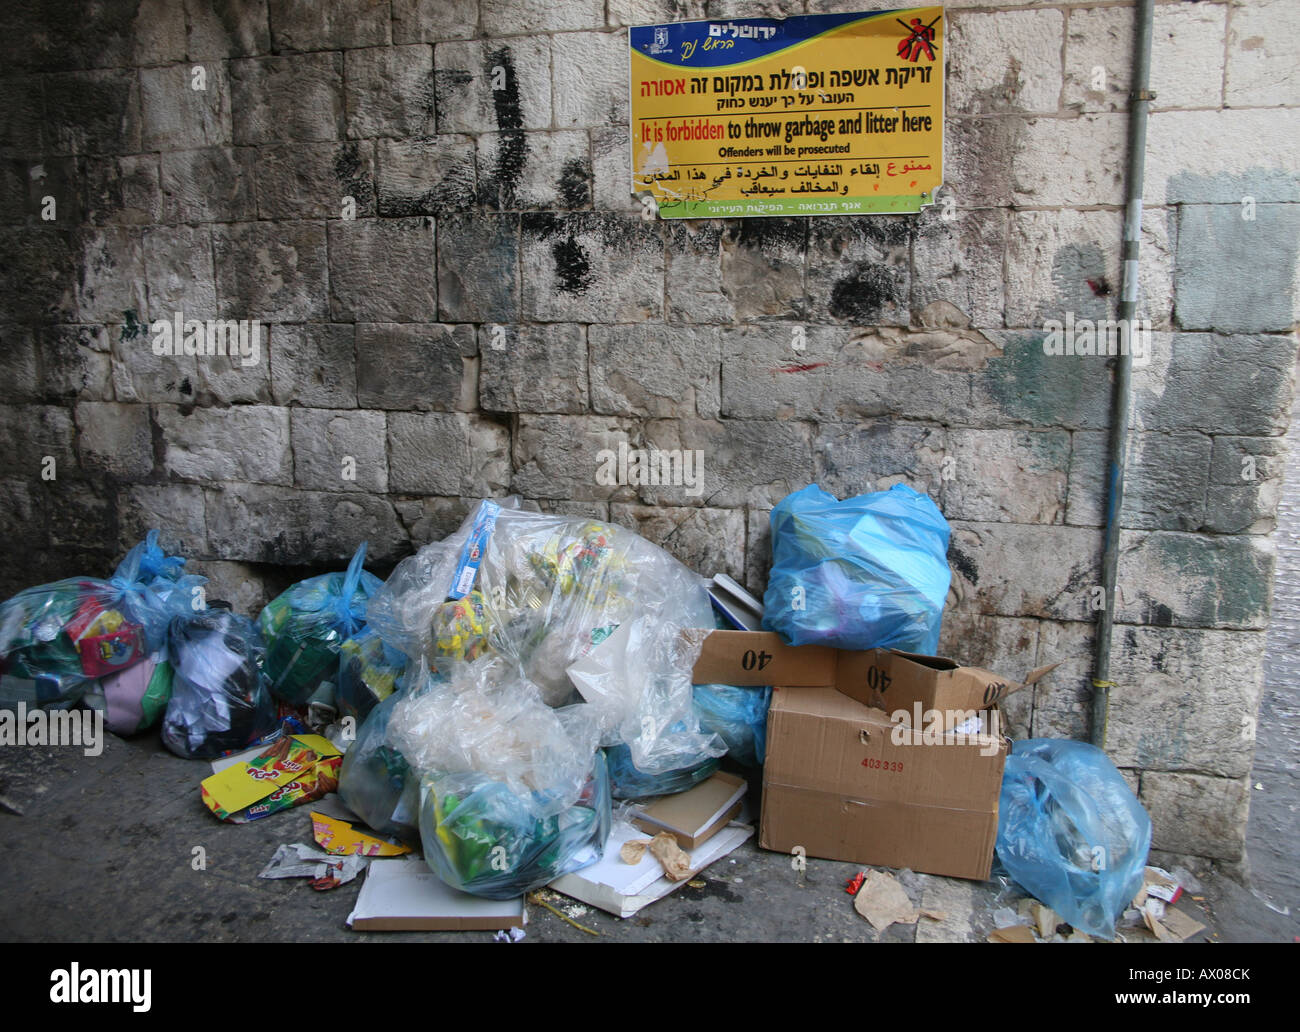 Garbage strewn under a sign forbidding it in a market in the old city section of Jerusalem Stock Photo